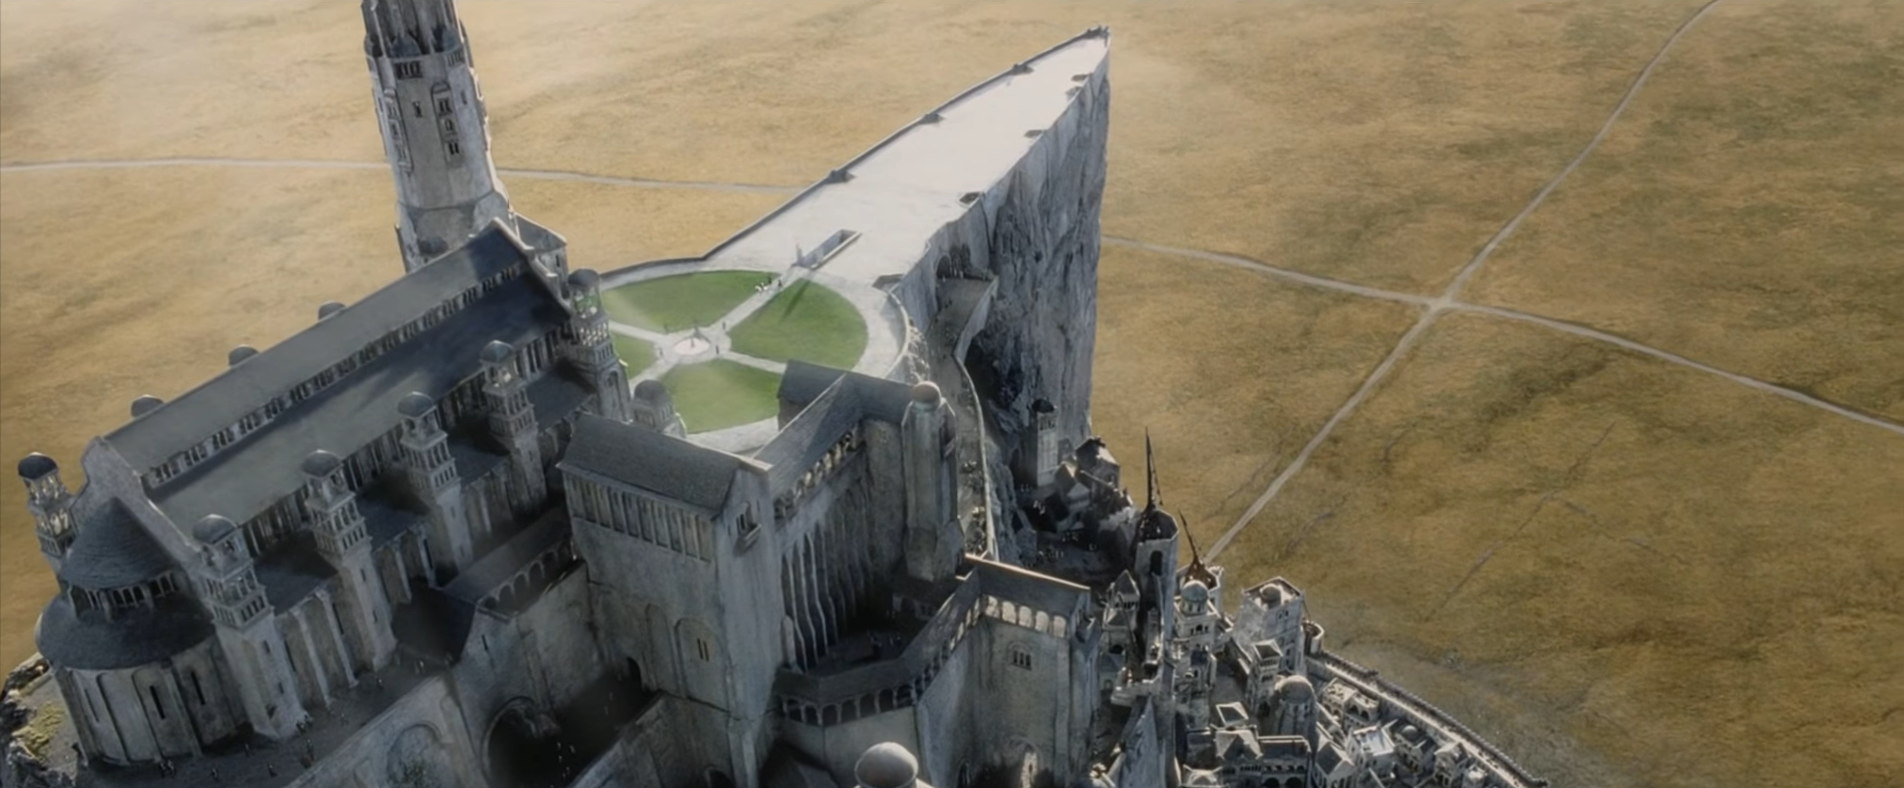 Minas tirith, city in middle-earth in lord of the rings books, movies